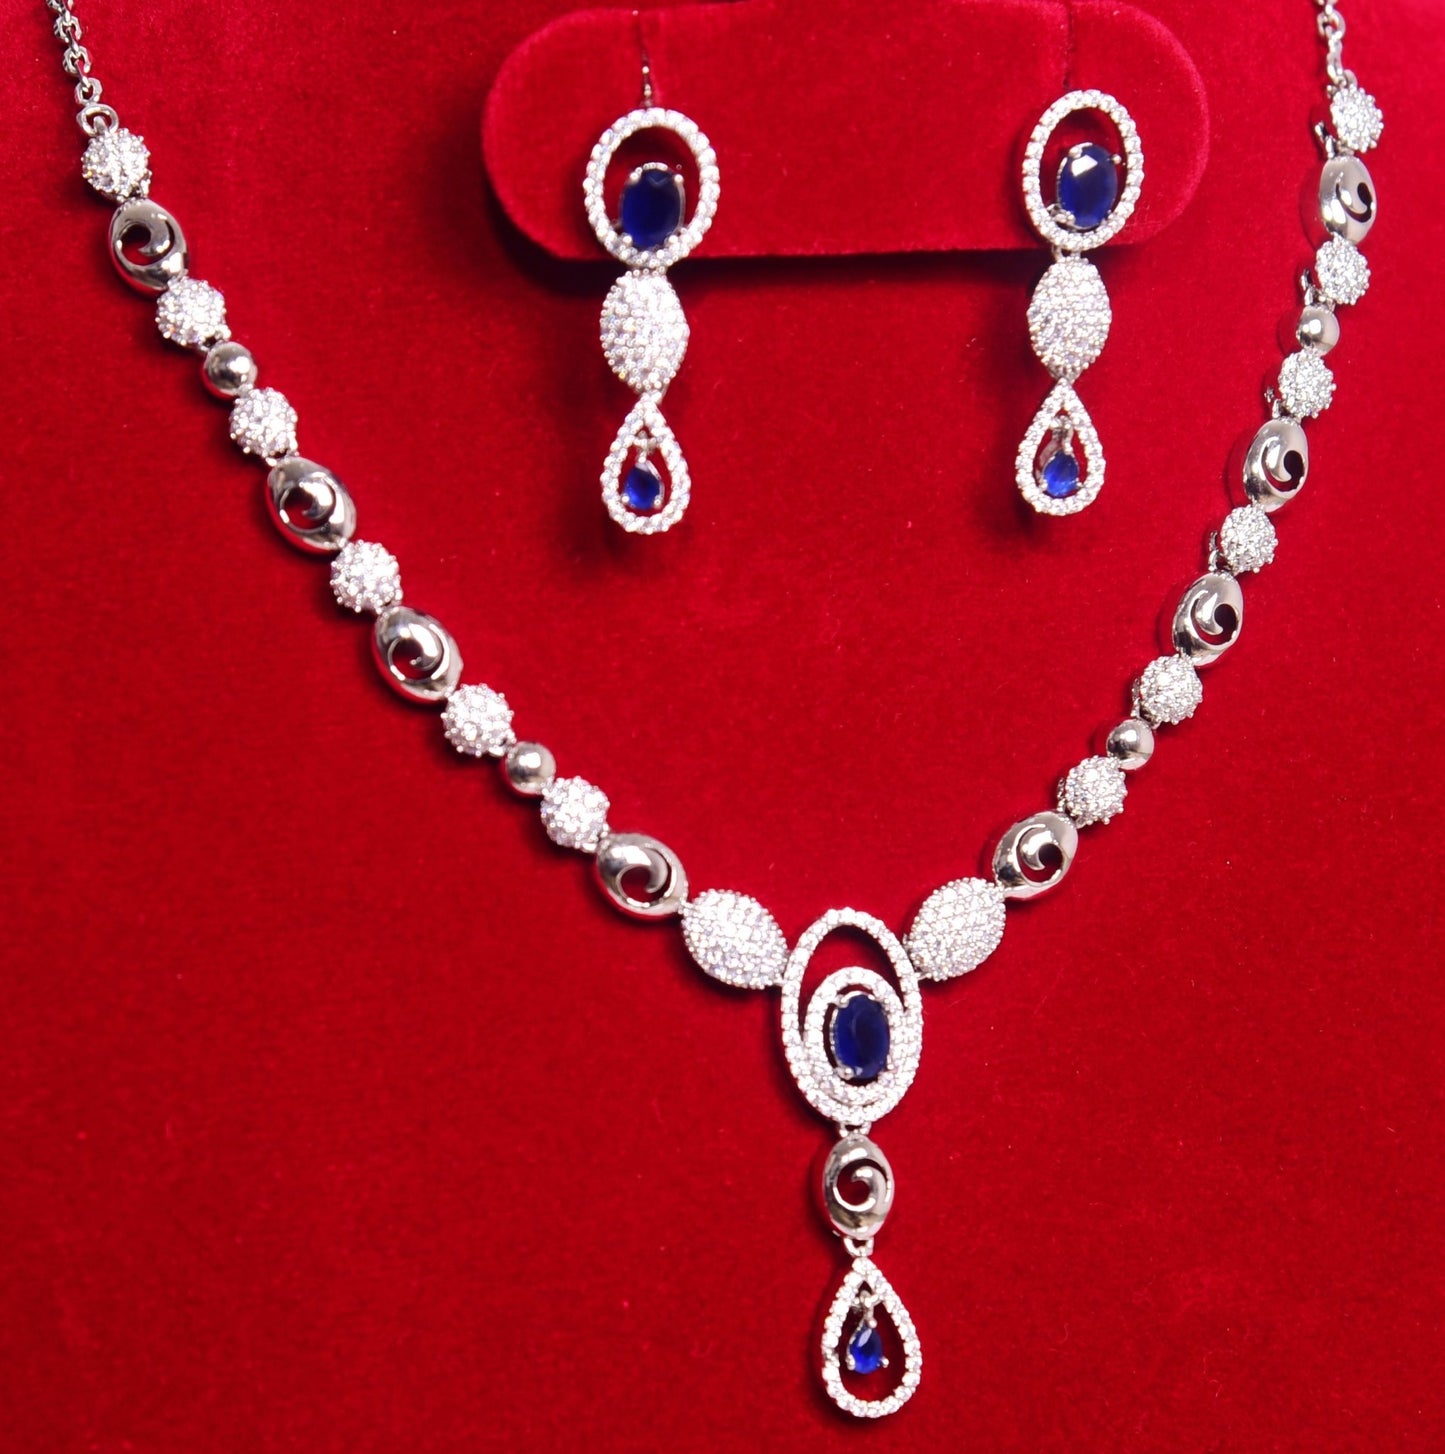 Silver Necklace | Made with pure 92.5 silver and precious imported gemstones | - Indique